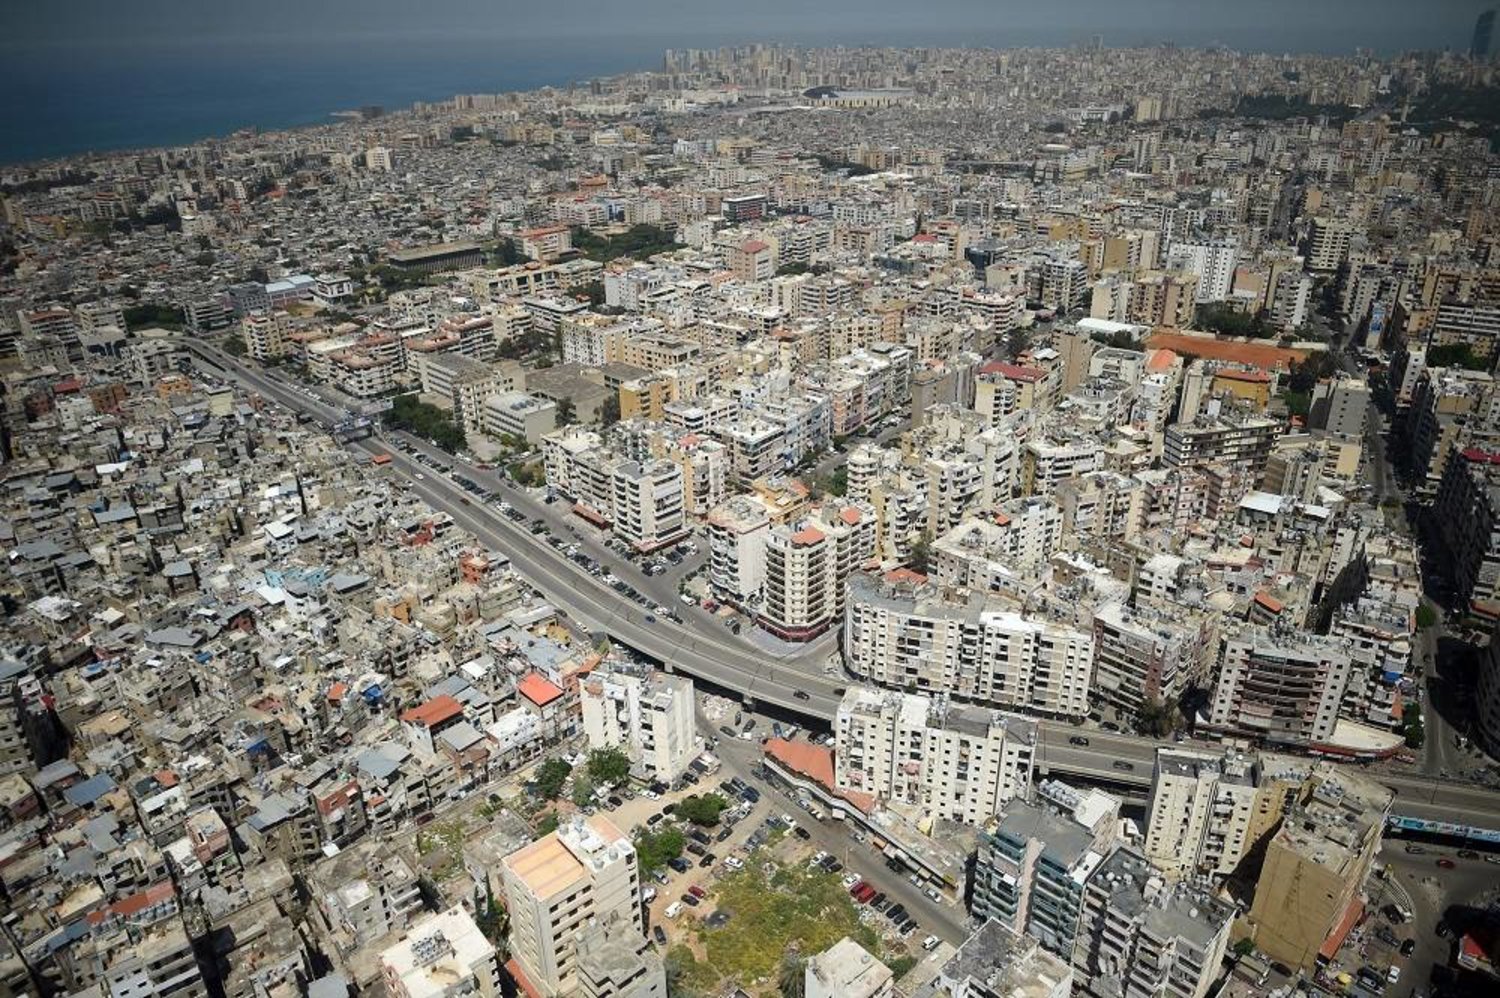 A general view of Beirut, Lebanon. (AFP/Getty Images)